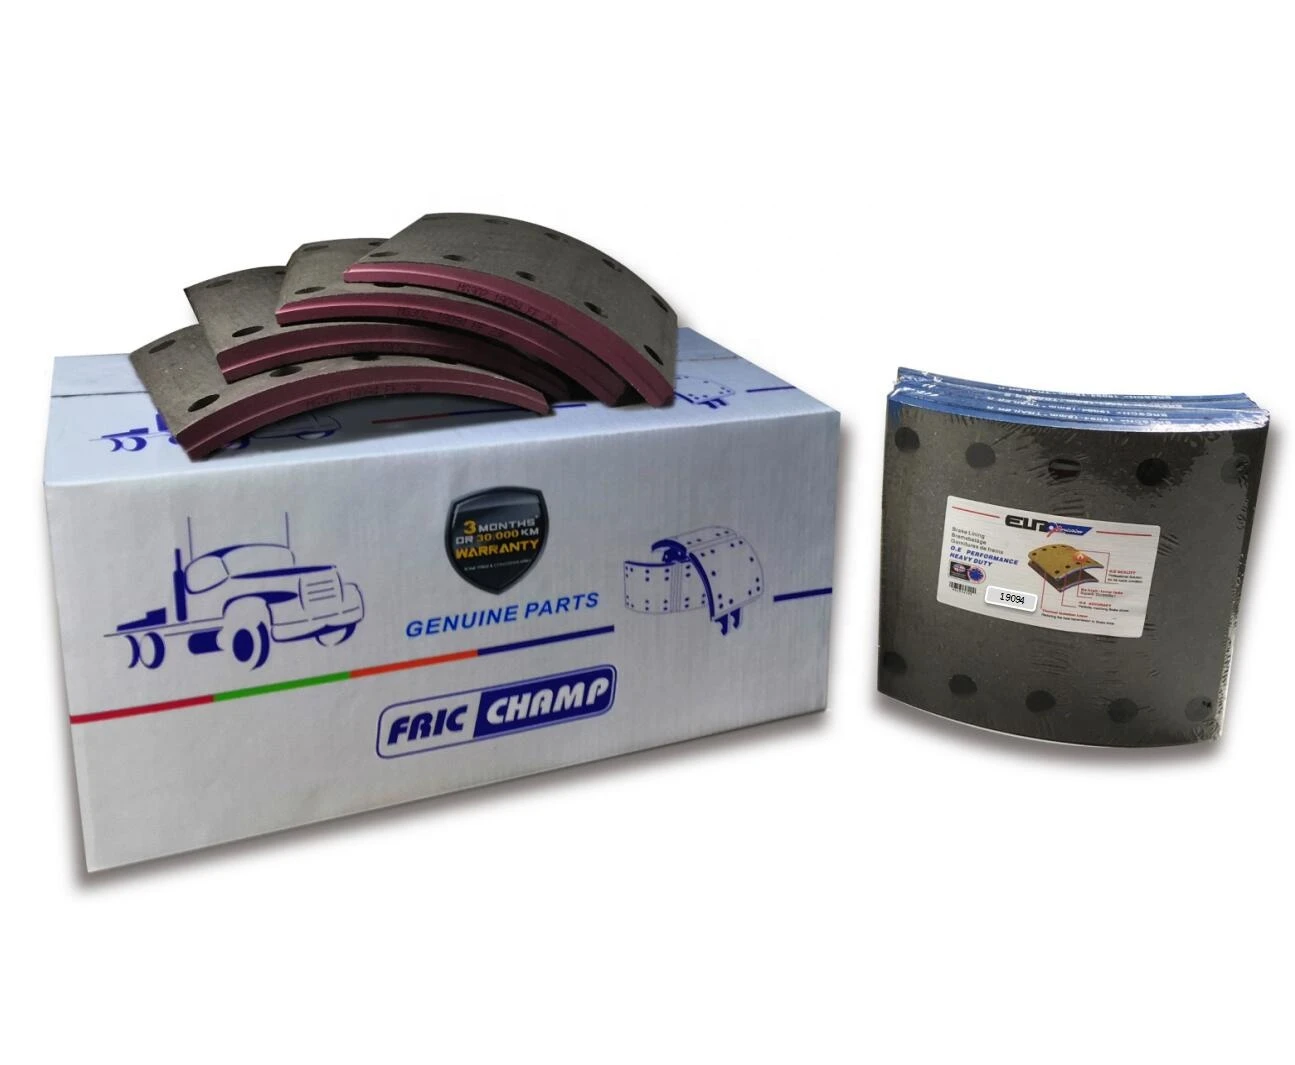 OEM QUALITY lining brake pads 19342/PB25 heavy duty brake lining manufacturers in china